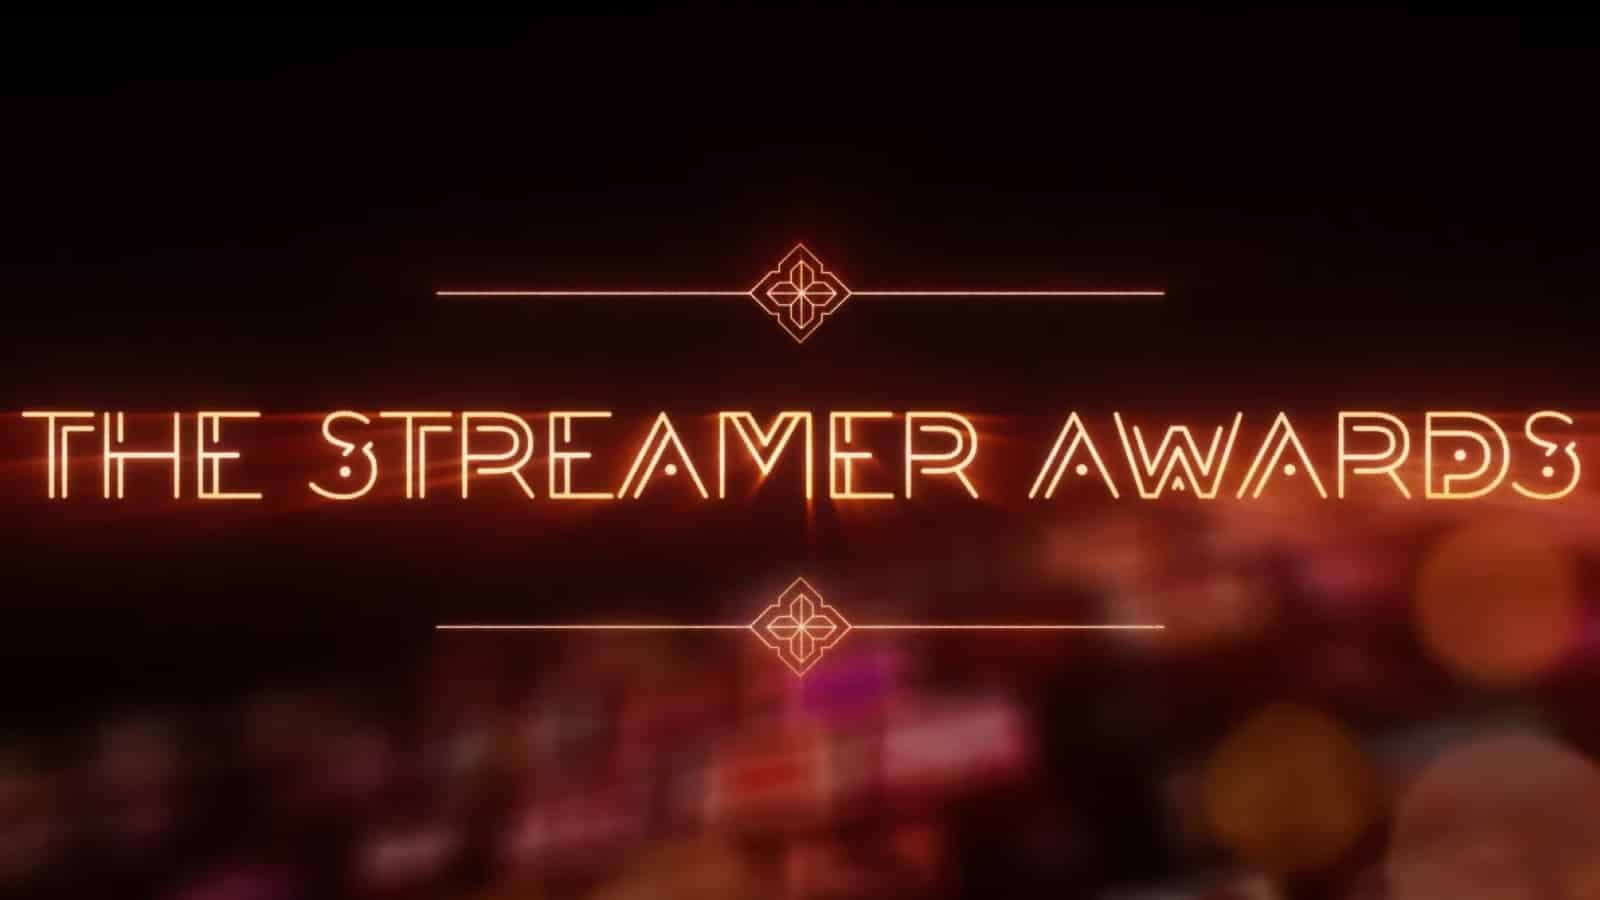 QTCinderella hopes Streamer Awards can help 'give more recognition to  streamers' - Dot Esports